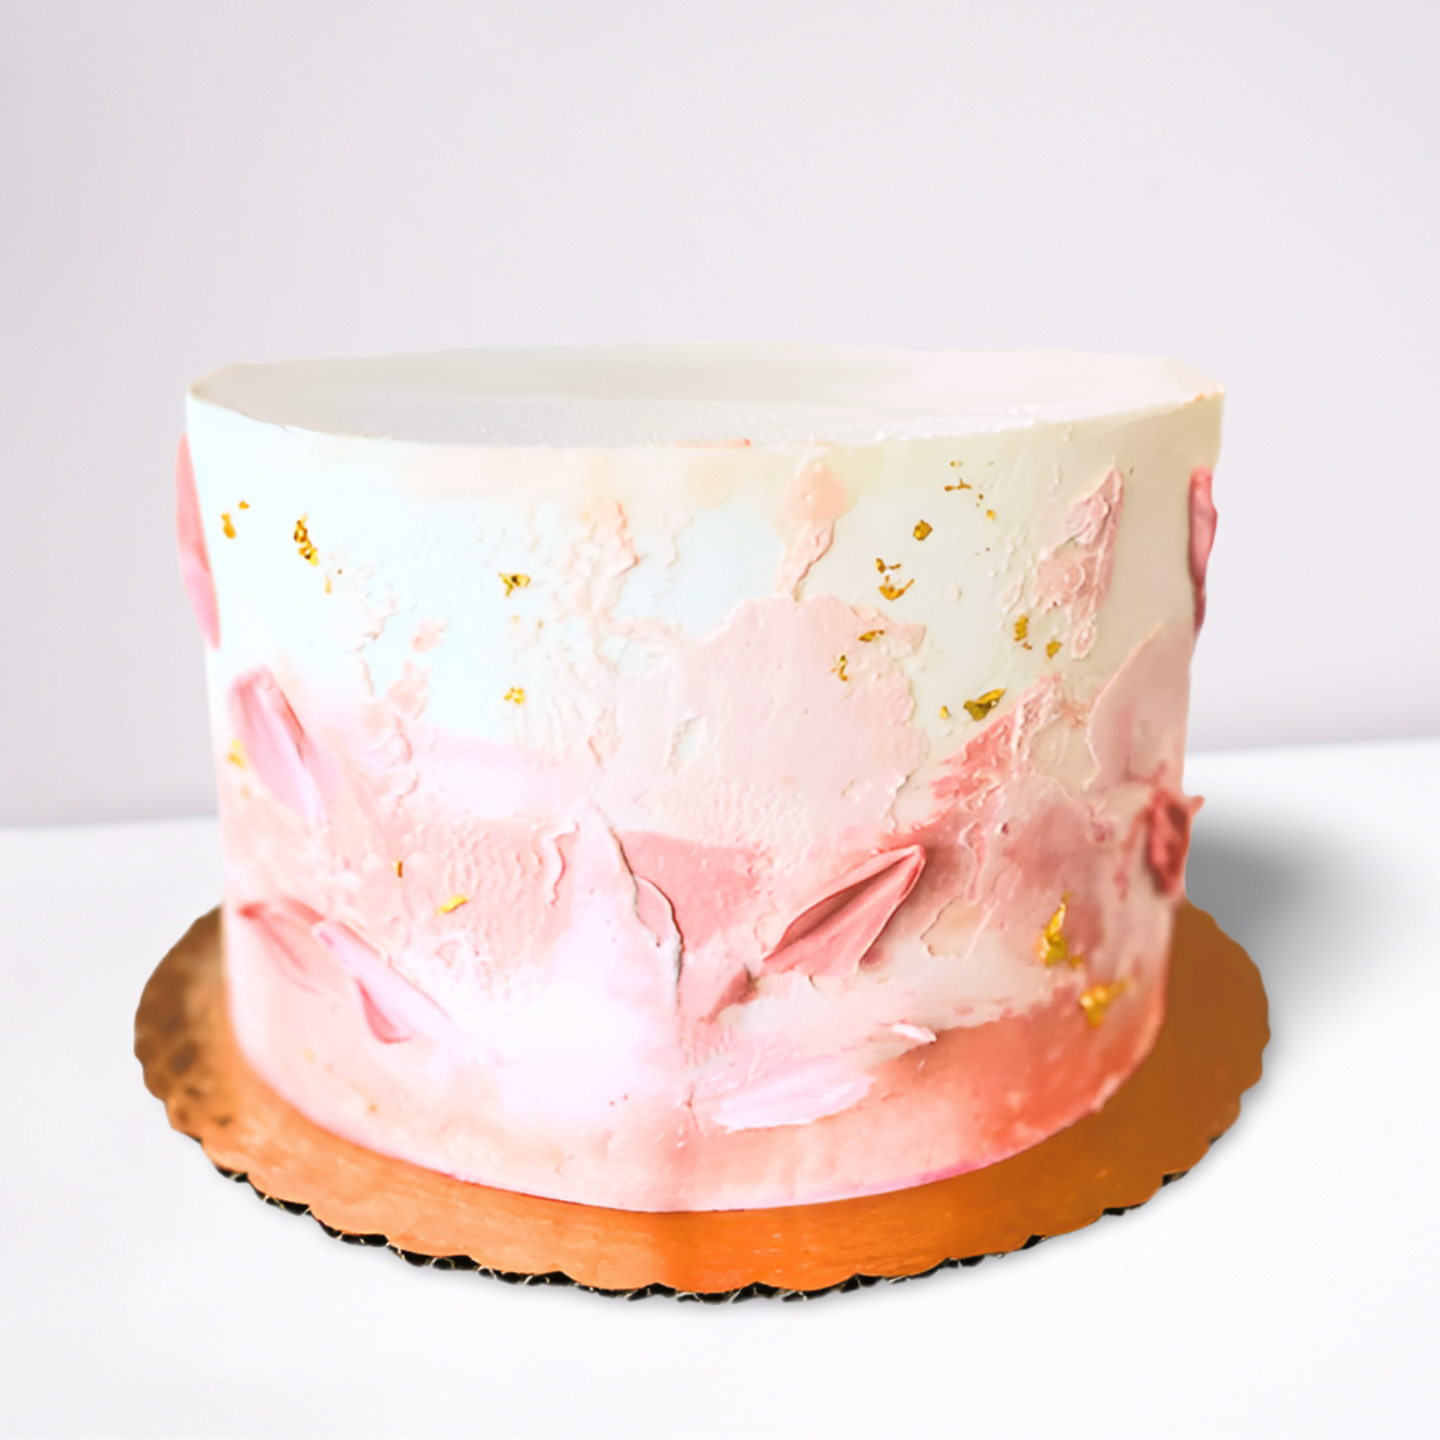 Abstract Petals Cutting Cake